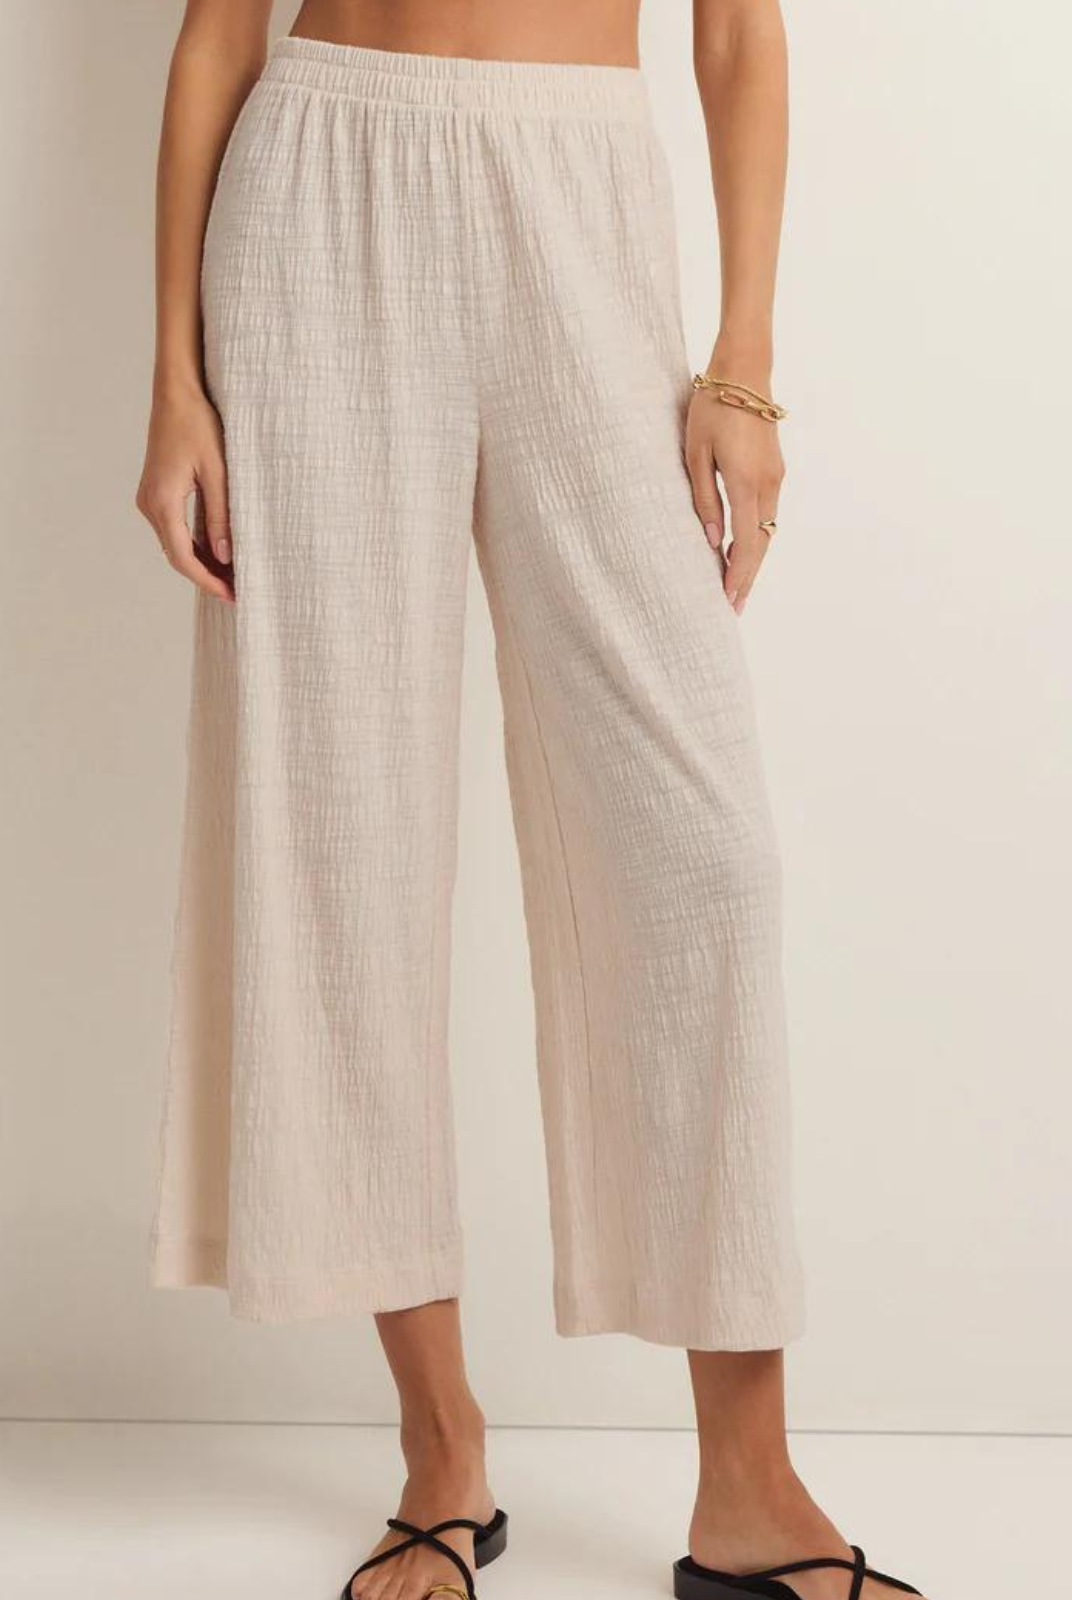 Z Supply Scout Textured Slub Pant. Comfy meets chic in this high rise, wide leg pant. With its relaxed fit and textured slub fabric, you'll have fun dressing it up or down, day or night.